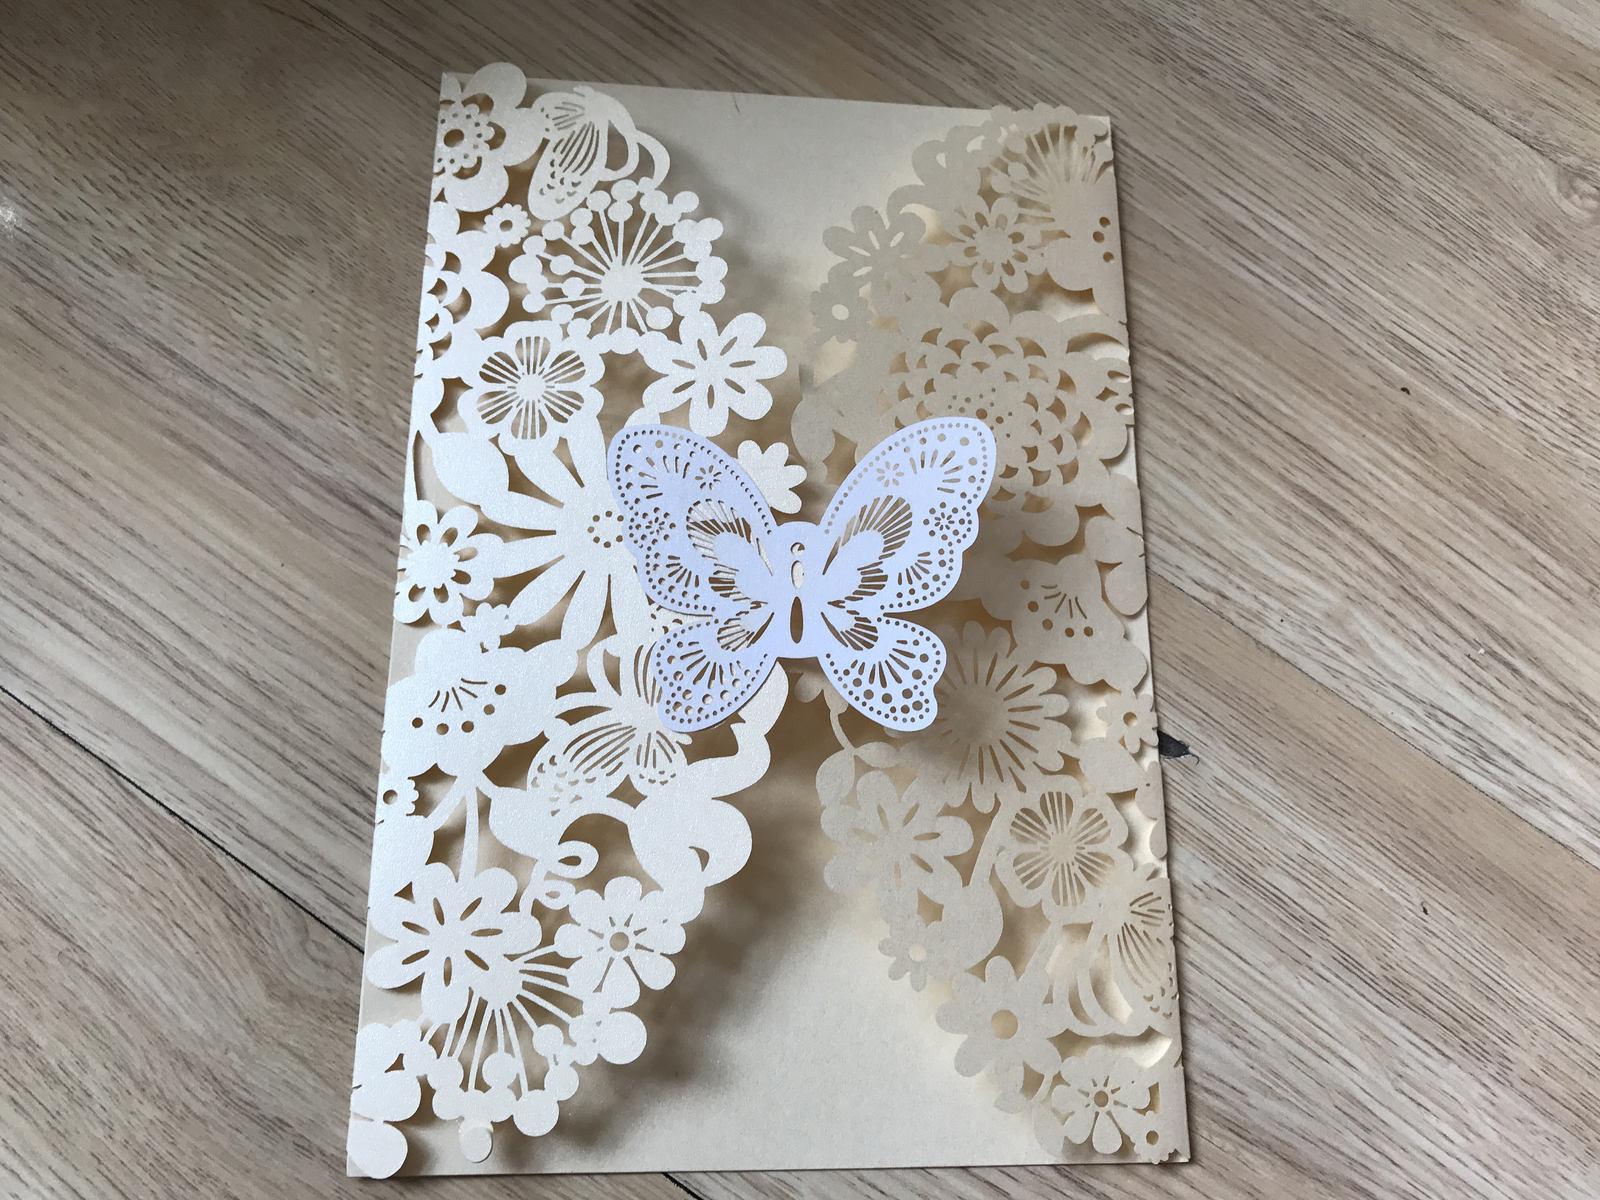 50pcs Butterfly Personalised Laser Cut Wedding Cards,Birthday Invitations,Invite